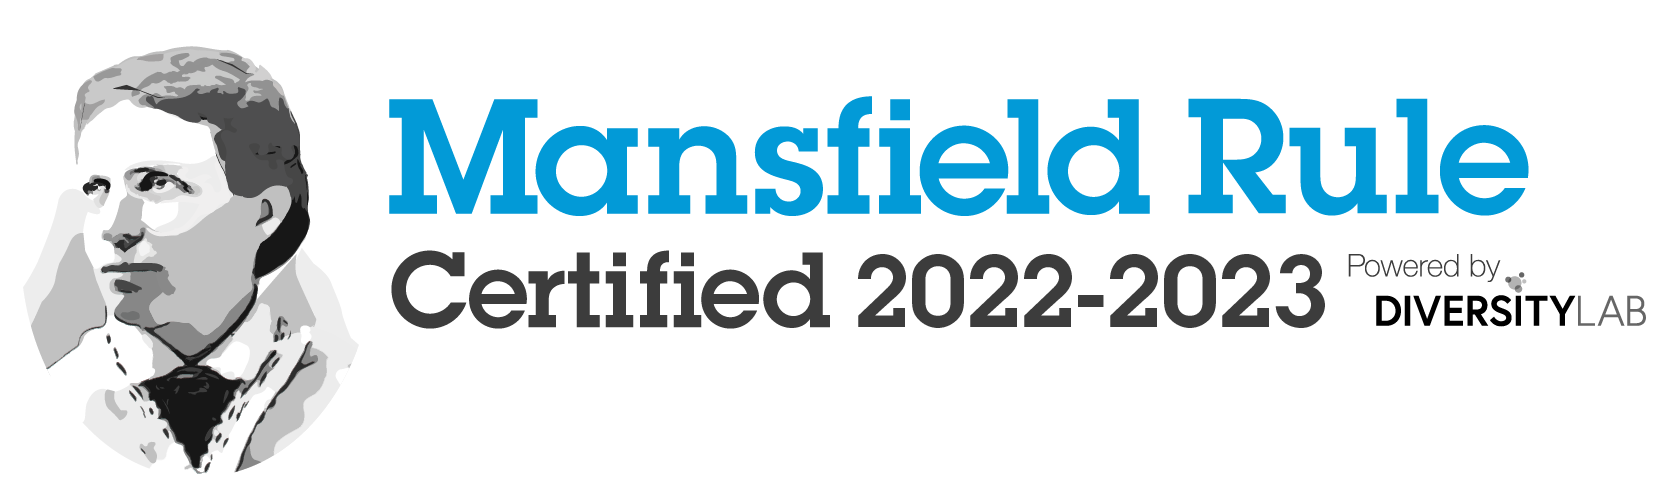 Williams & Connolly Receives Mansfield Certification for 2022-2023